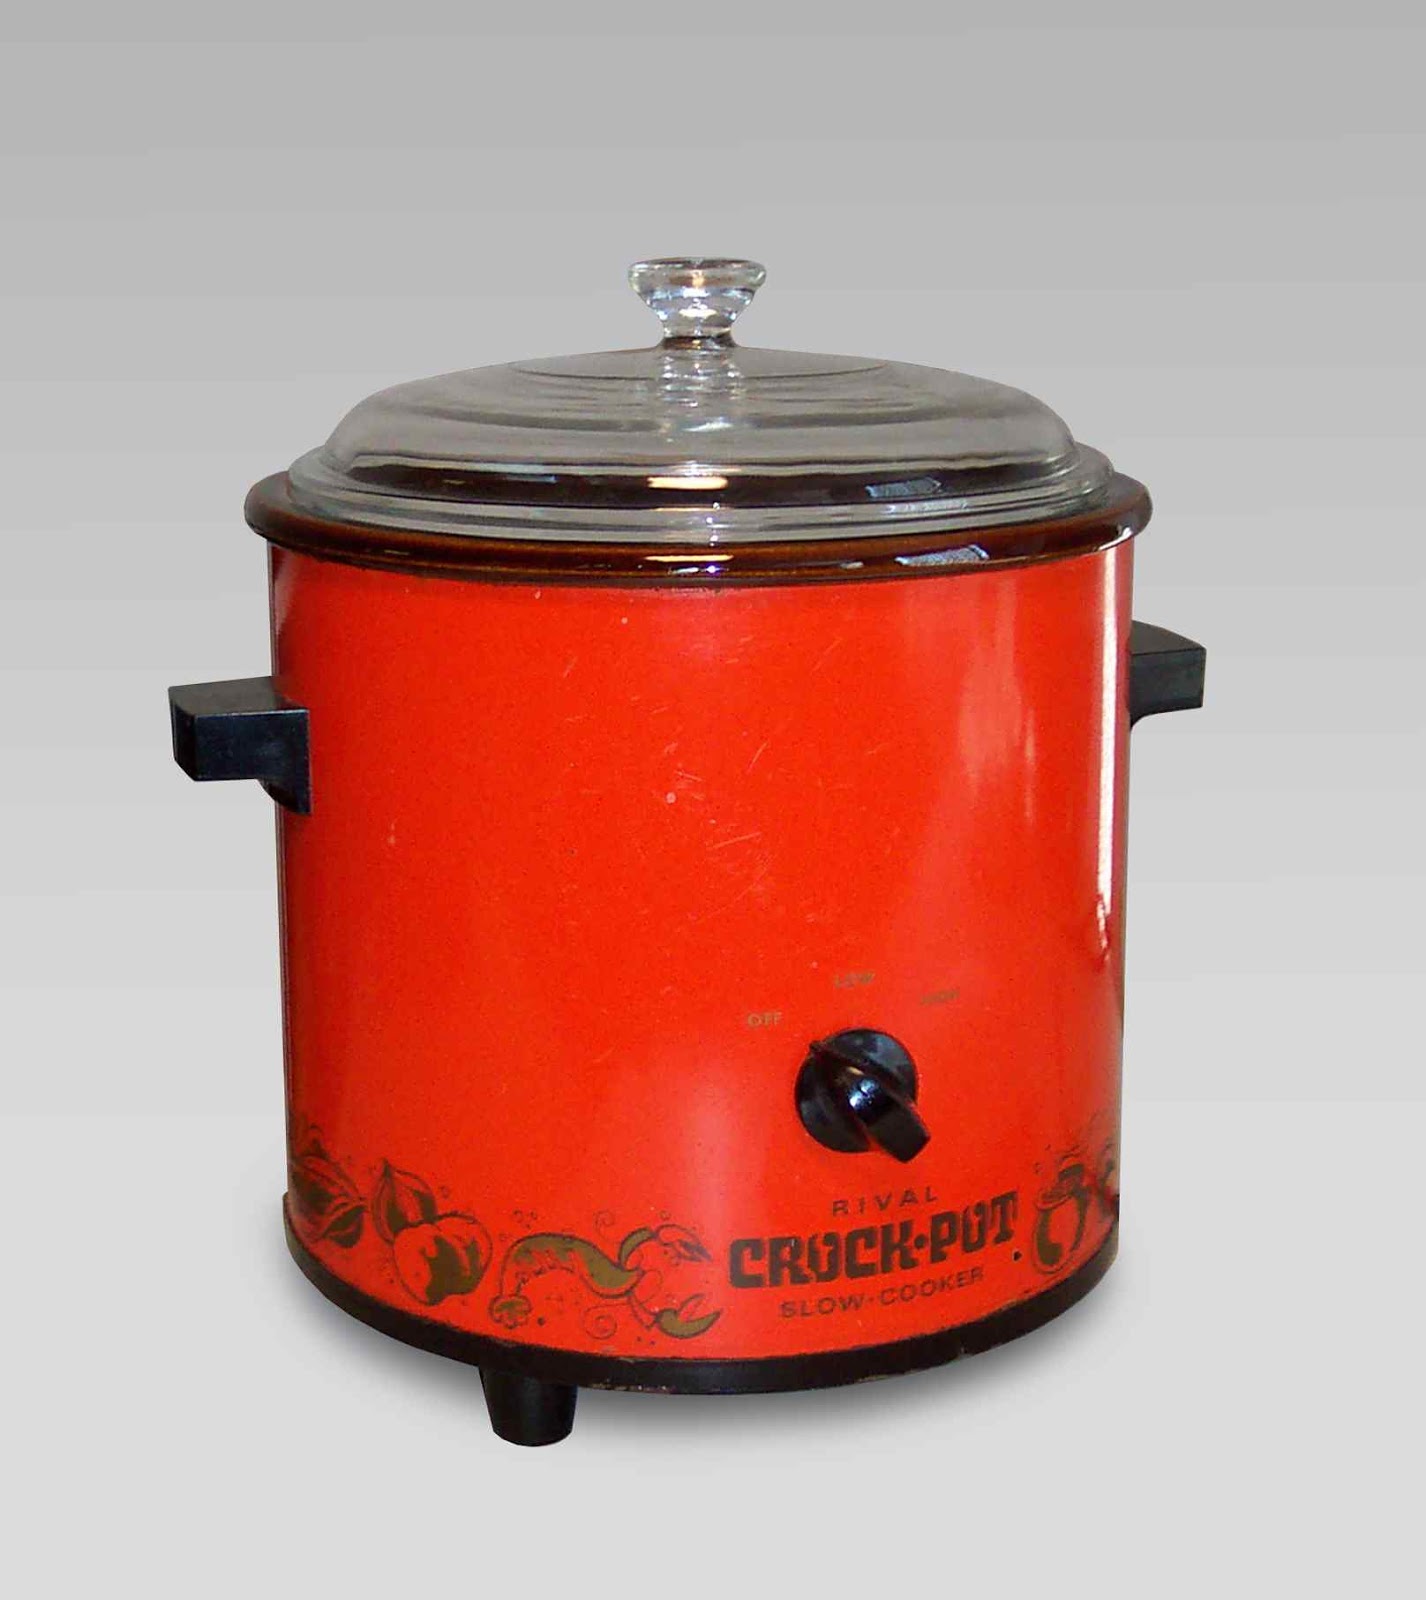 Northeast News, Remember This? The Rival Crock-pot